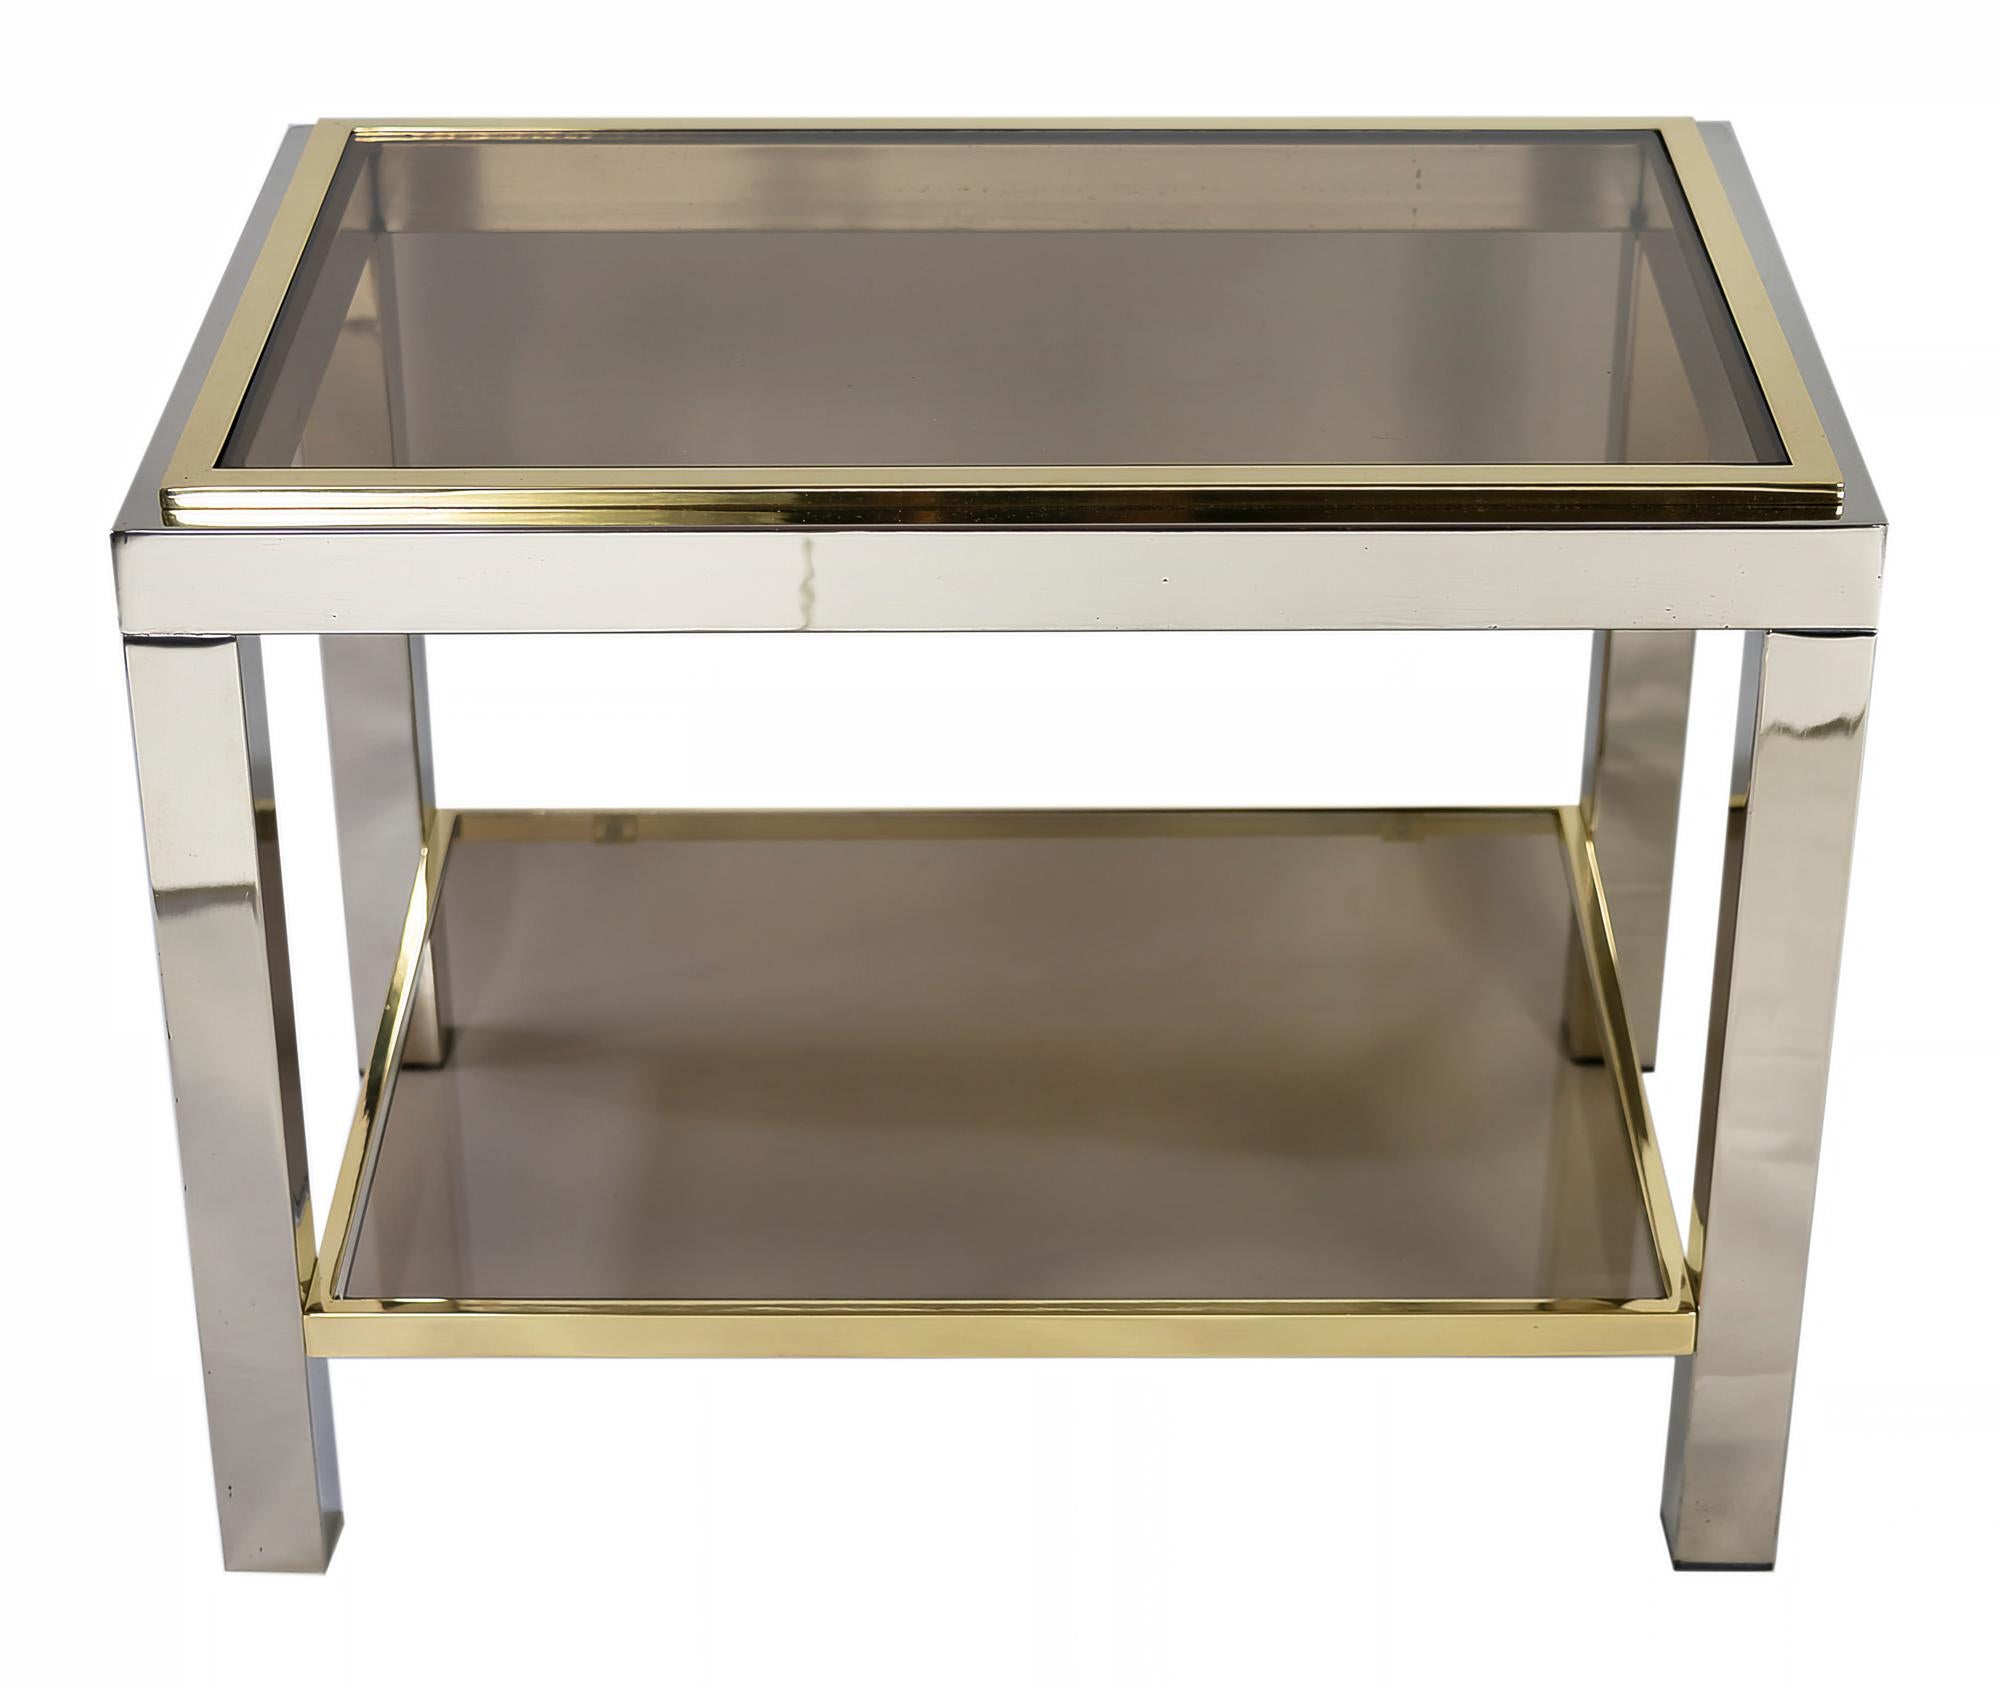 This pair of mid-century Italian side tables made of brass and chrome frame with smoked glass.
Heavy and solid, very good condition (newly polished).